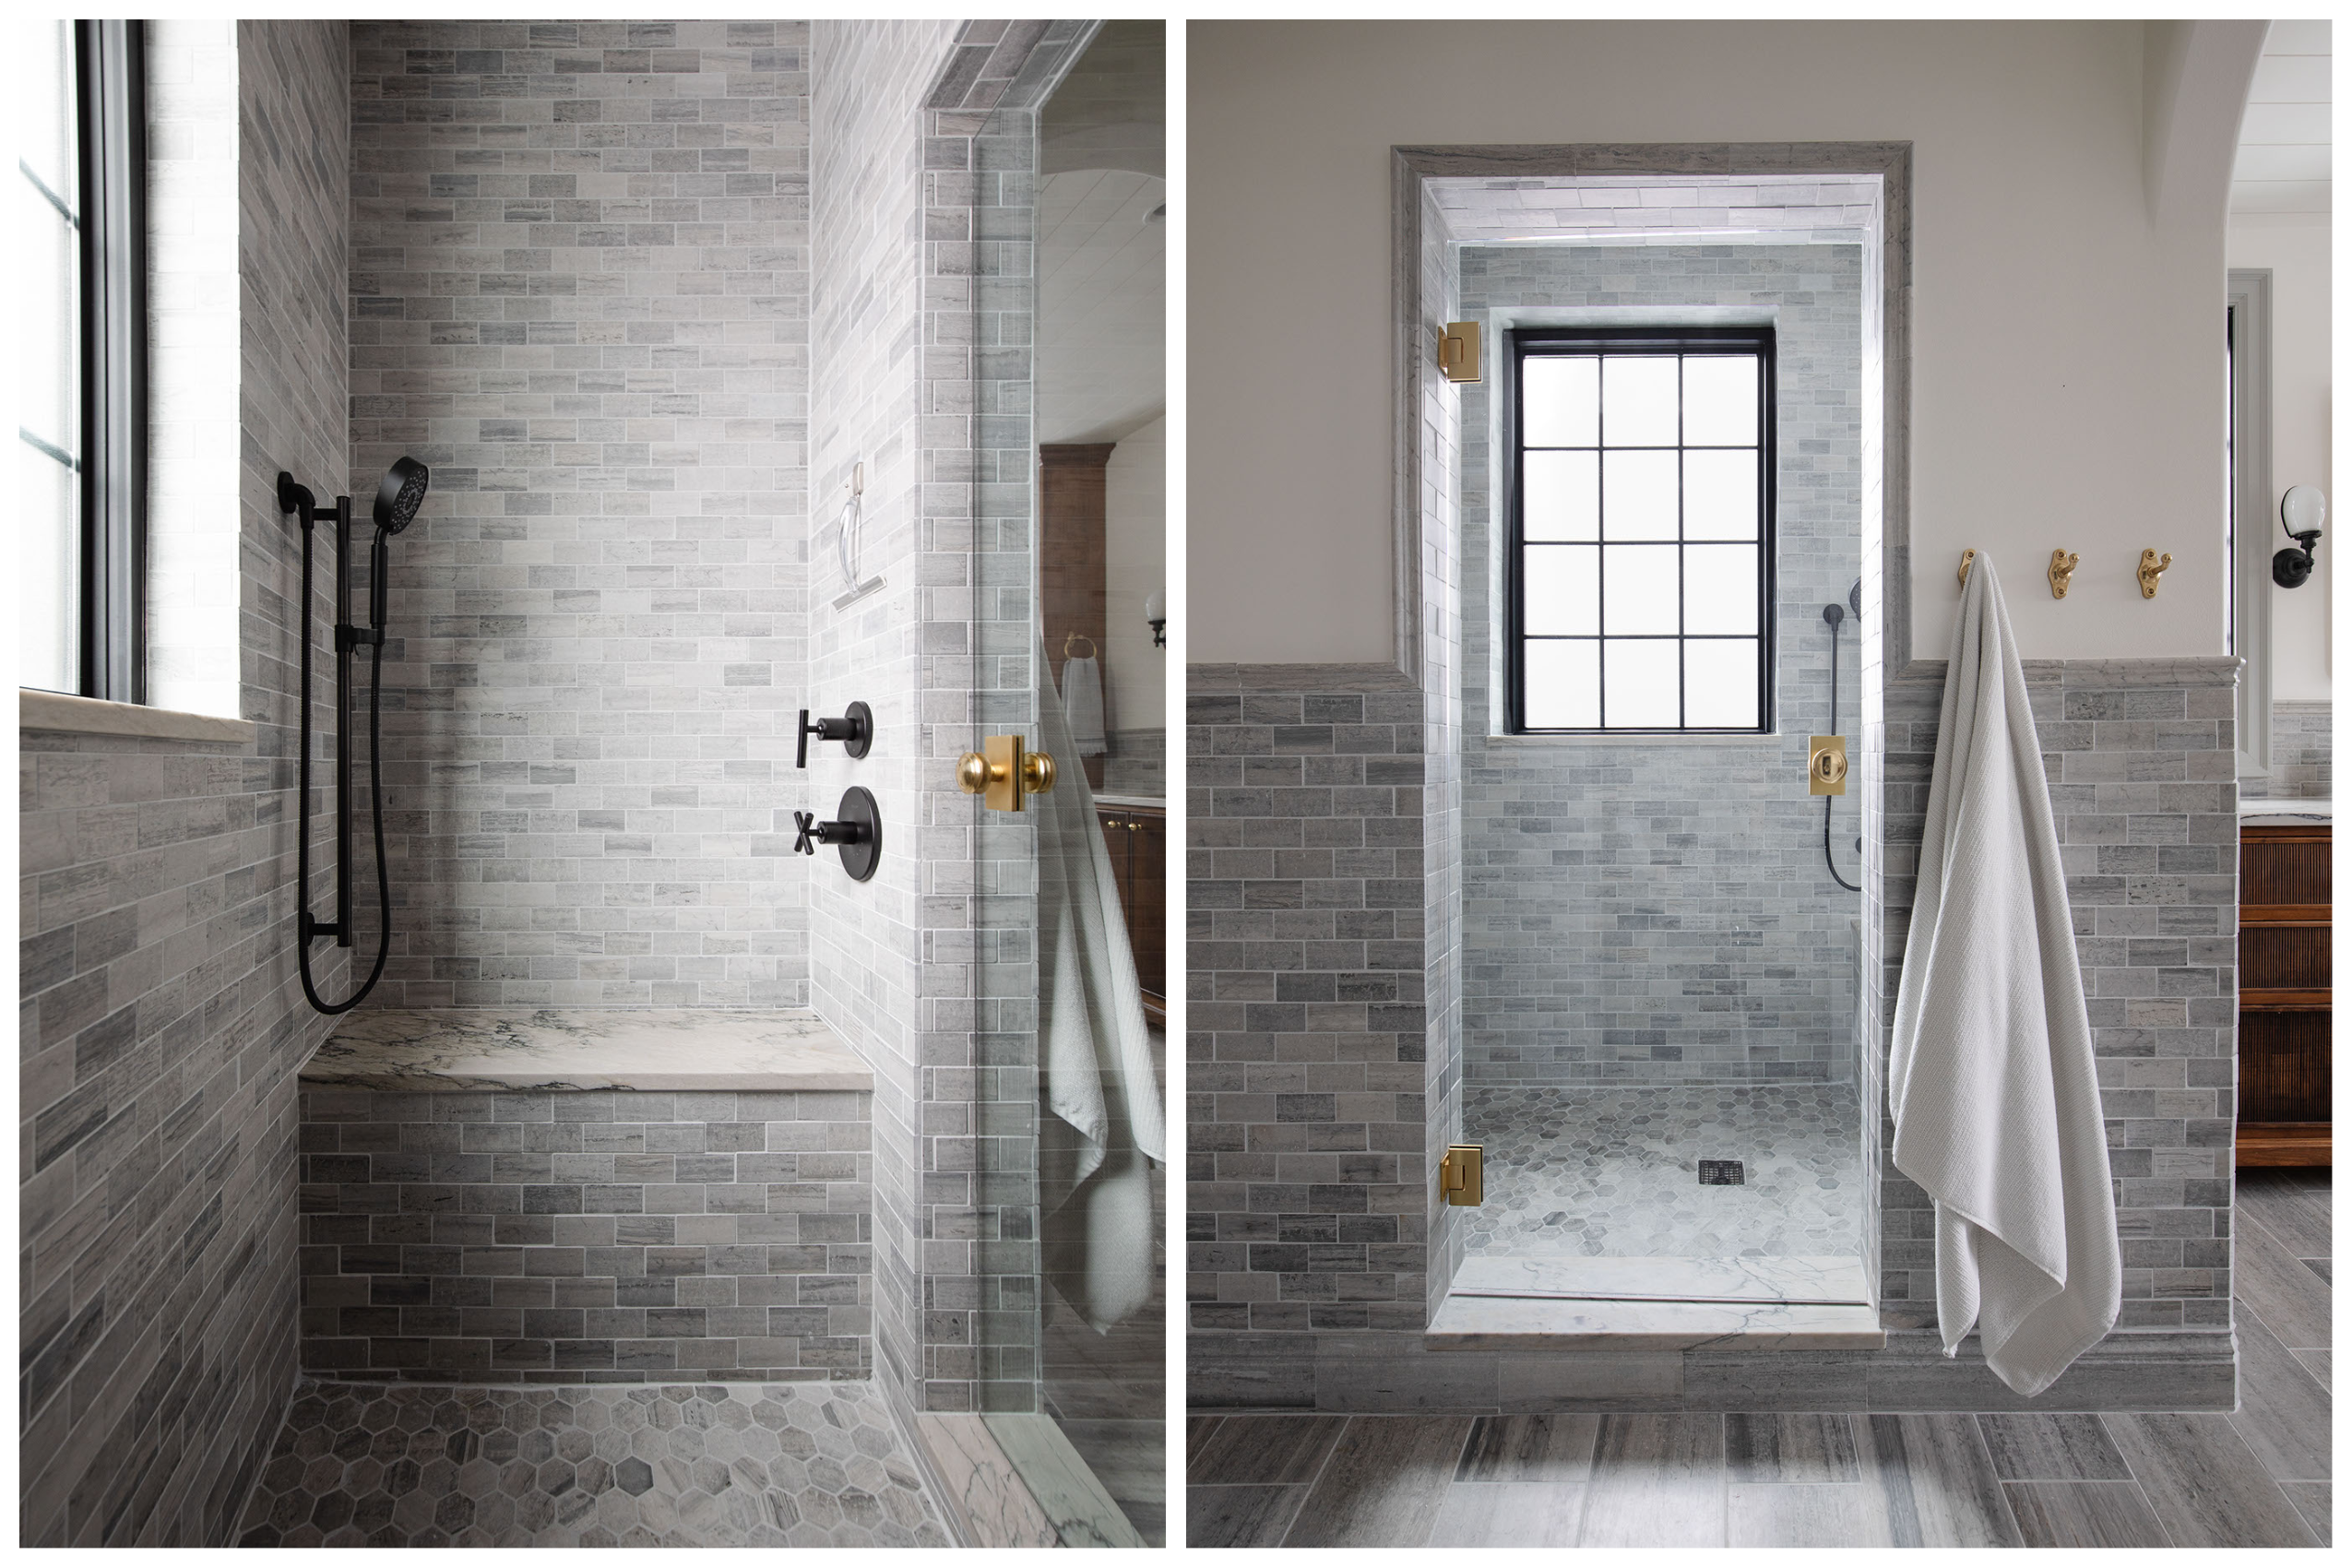 Primary bathroom with grey limestone tiled shower walls and floor